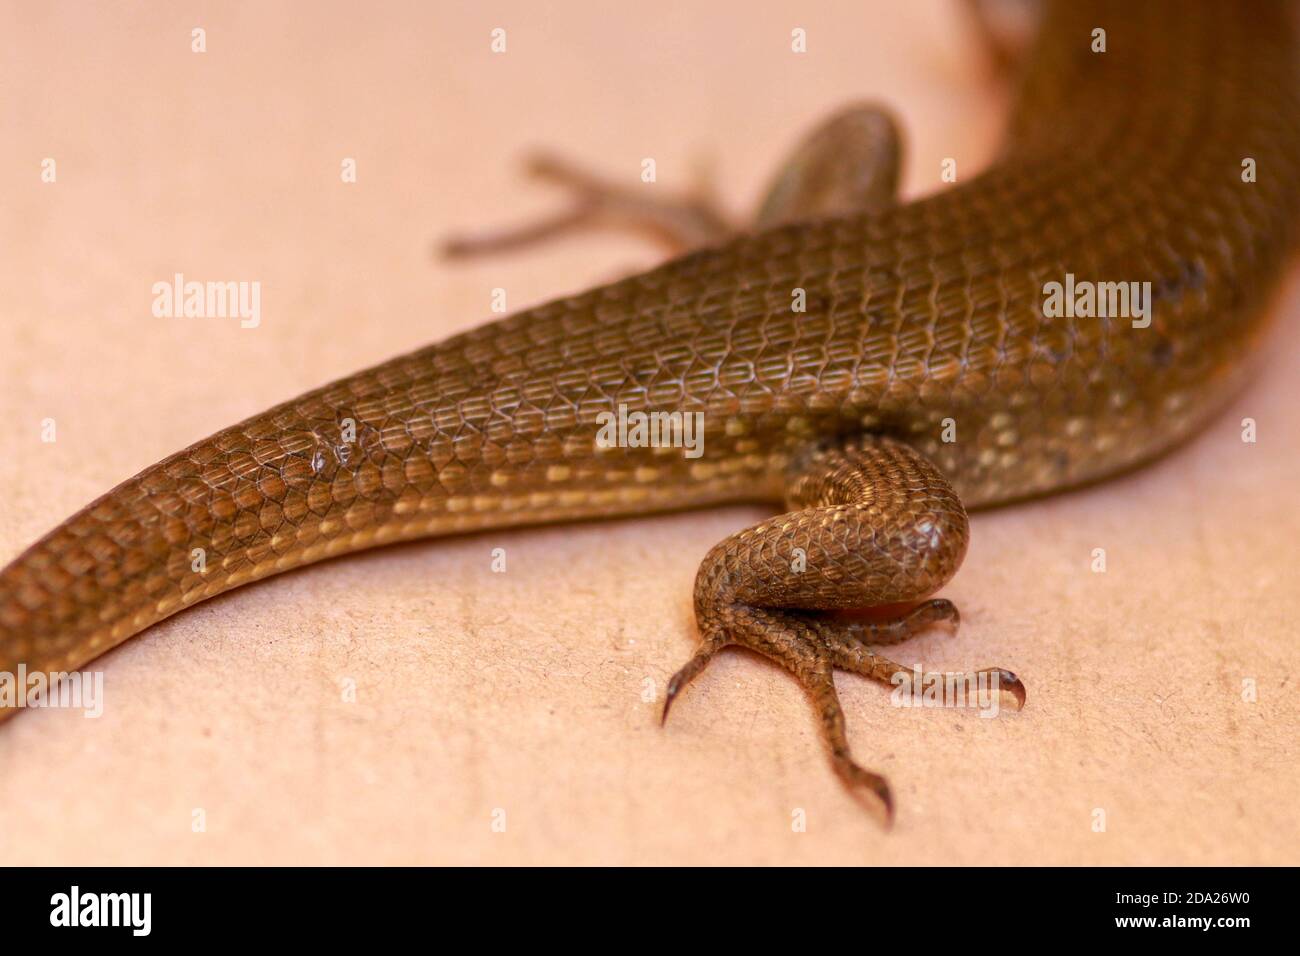 Close-up of hind legs with claws Eutropis multifasciata. East Indian brown mabuya, many-lined sun skink, many-striped skink, common sun skink, four Stock Photo